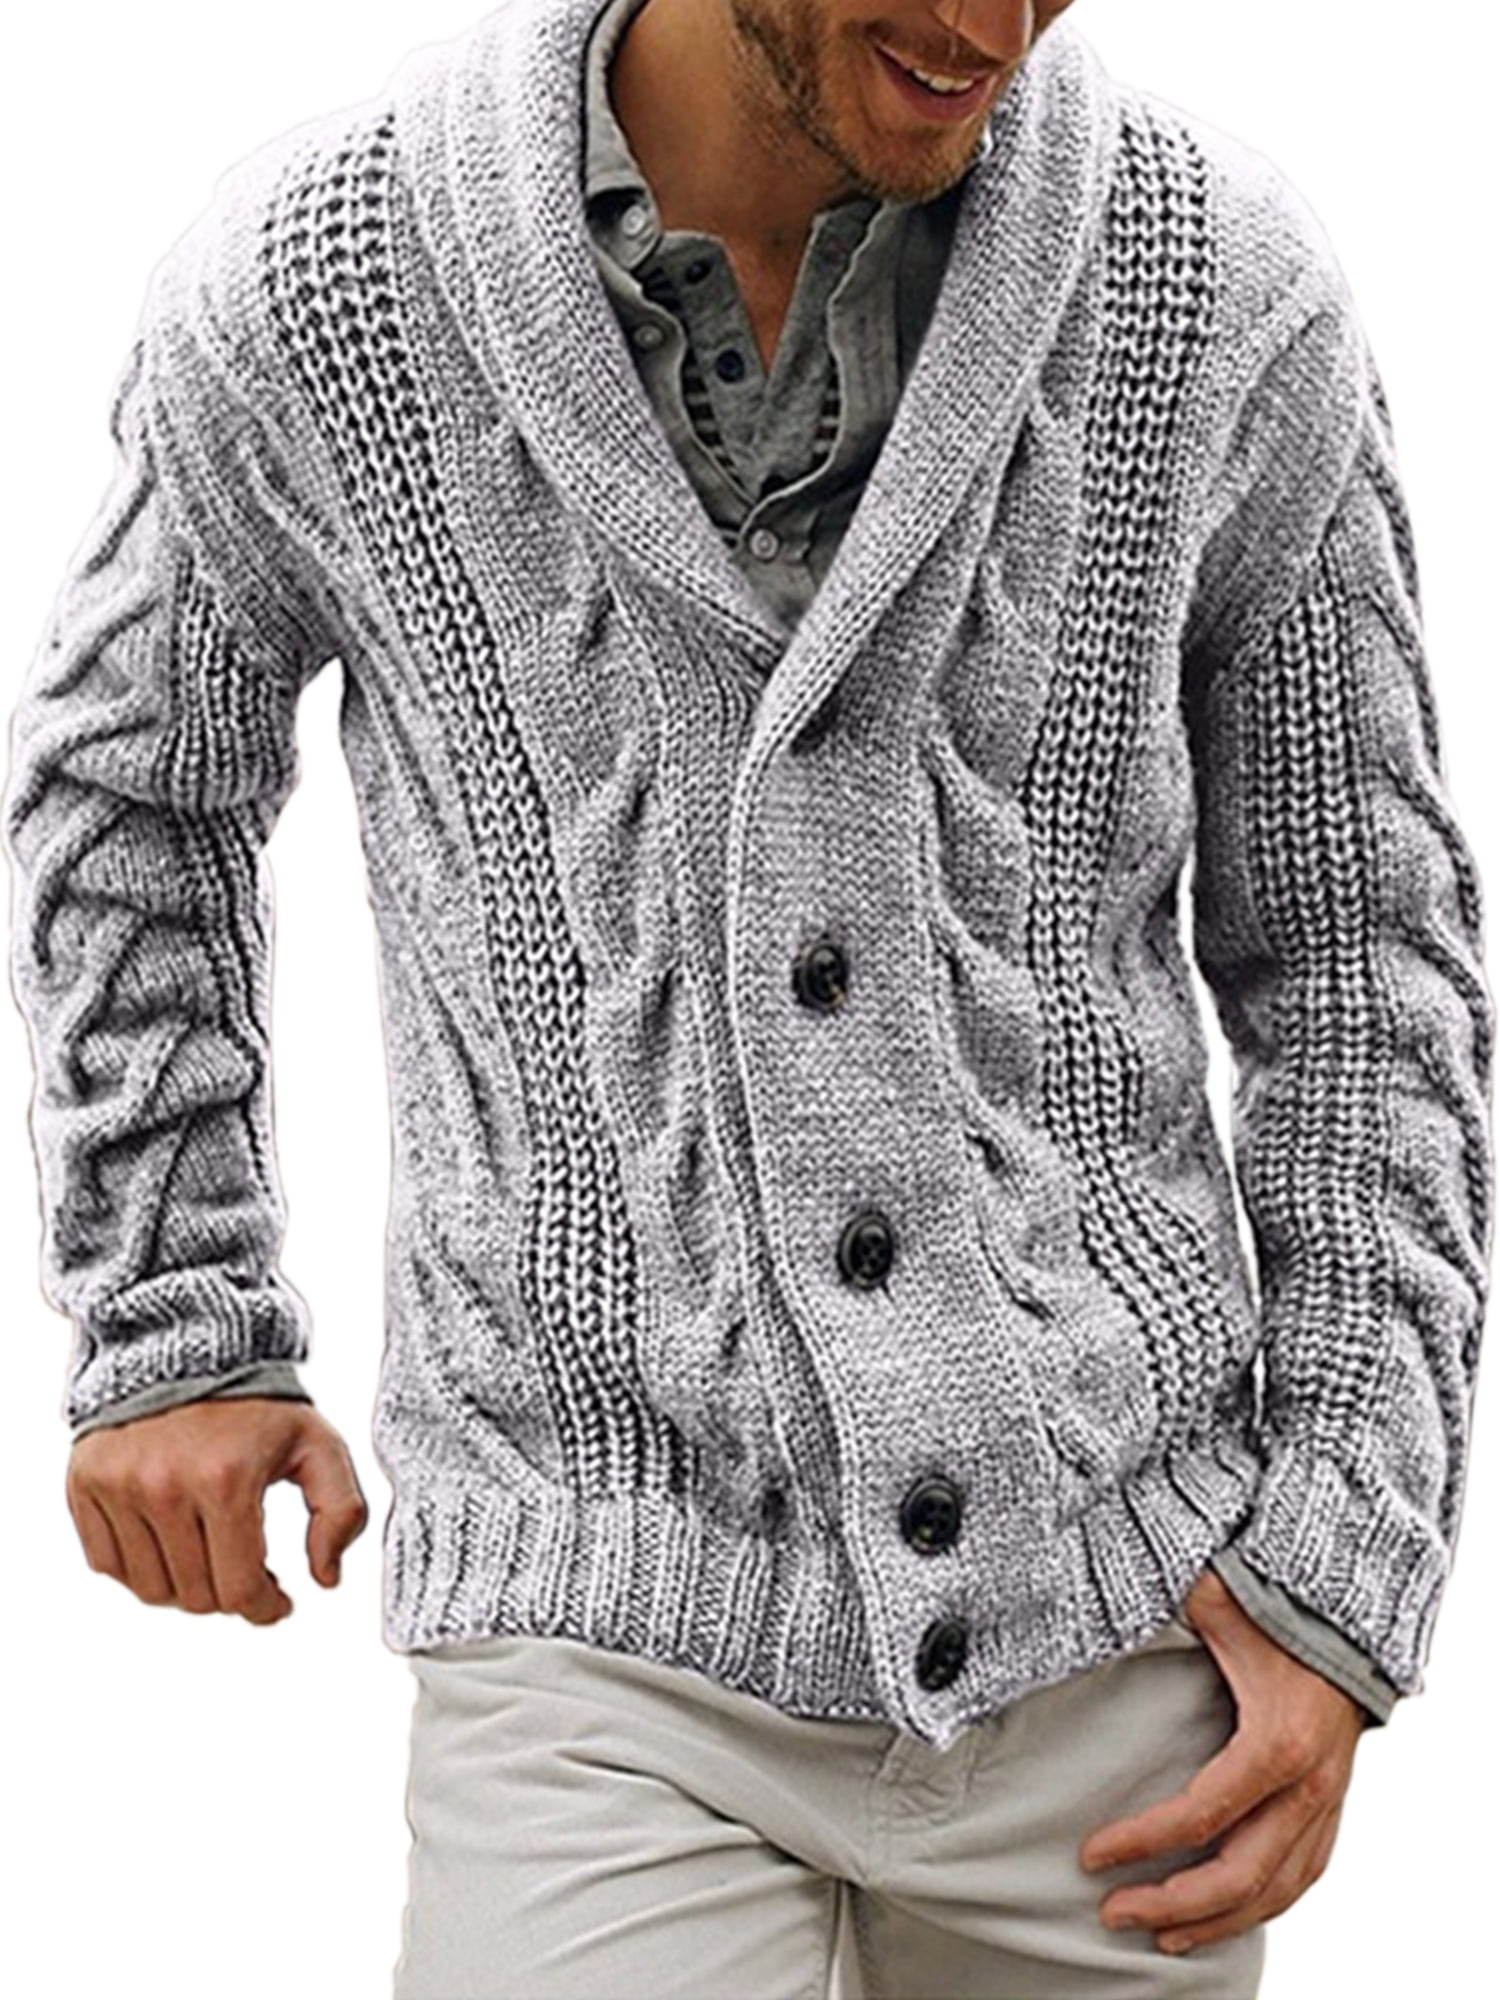 New Men's Sweaters Knitwear Cardigan Pullover Casual Coats Jumper Sweaters Tops 